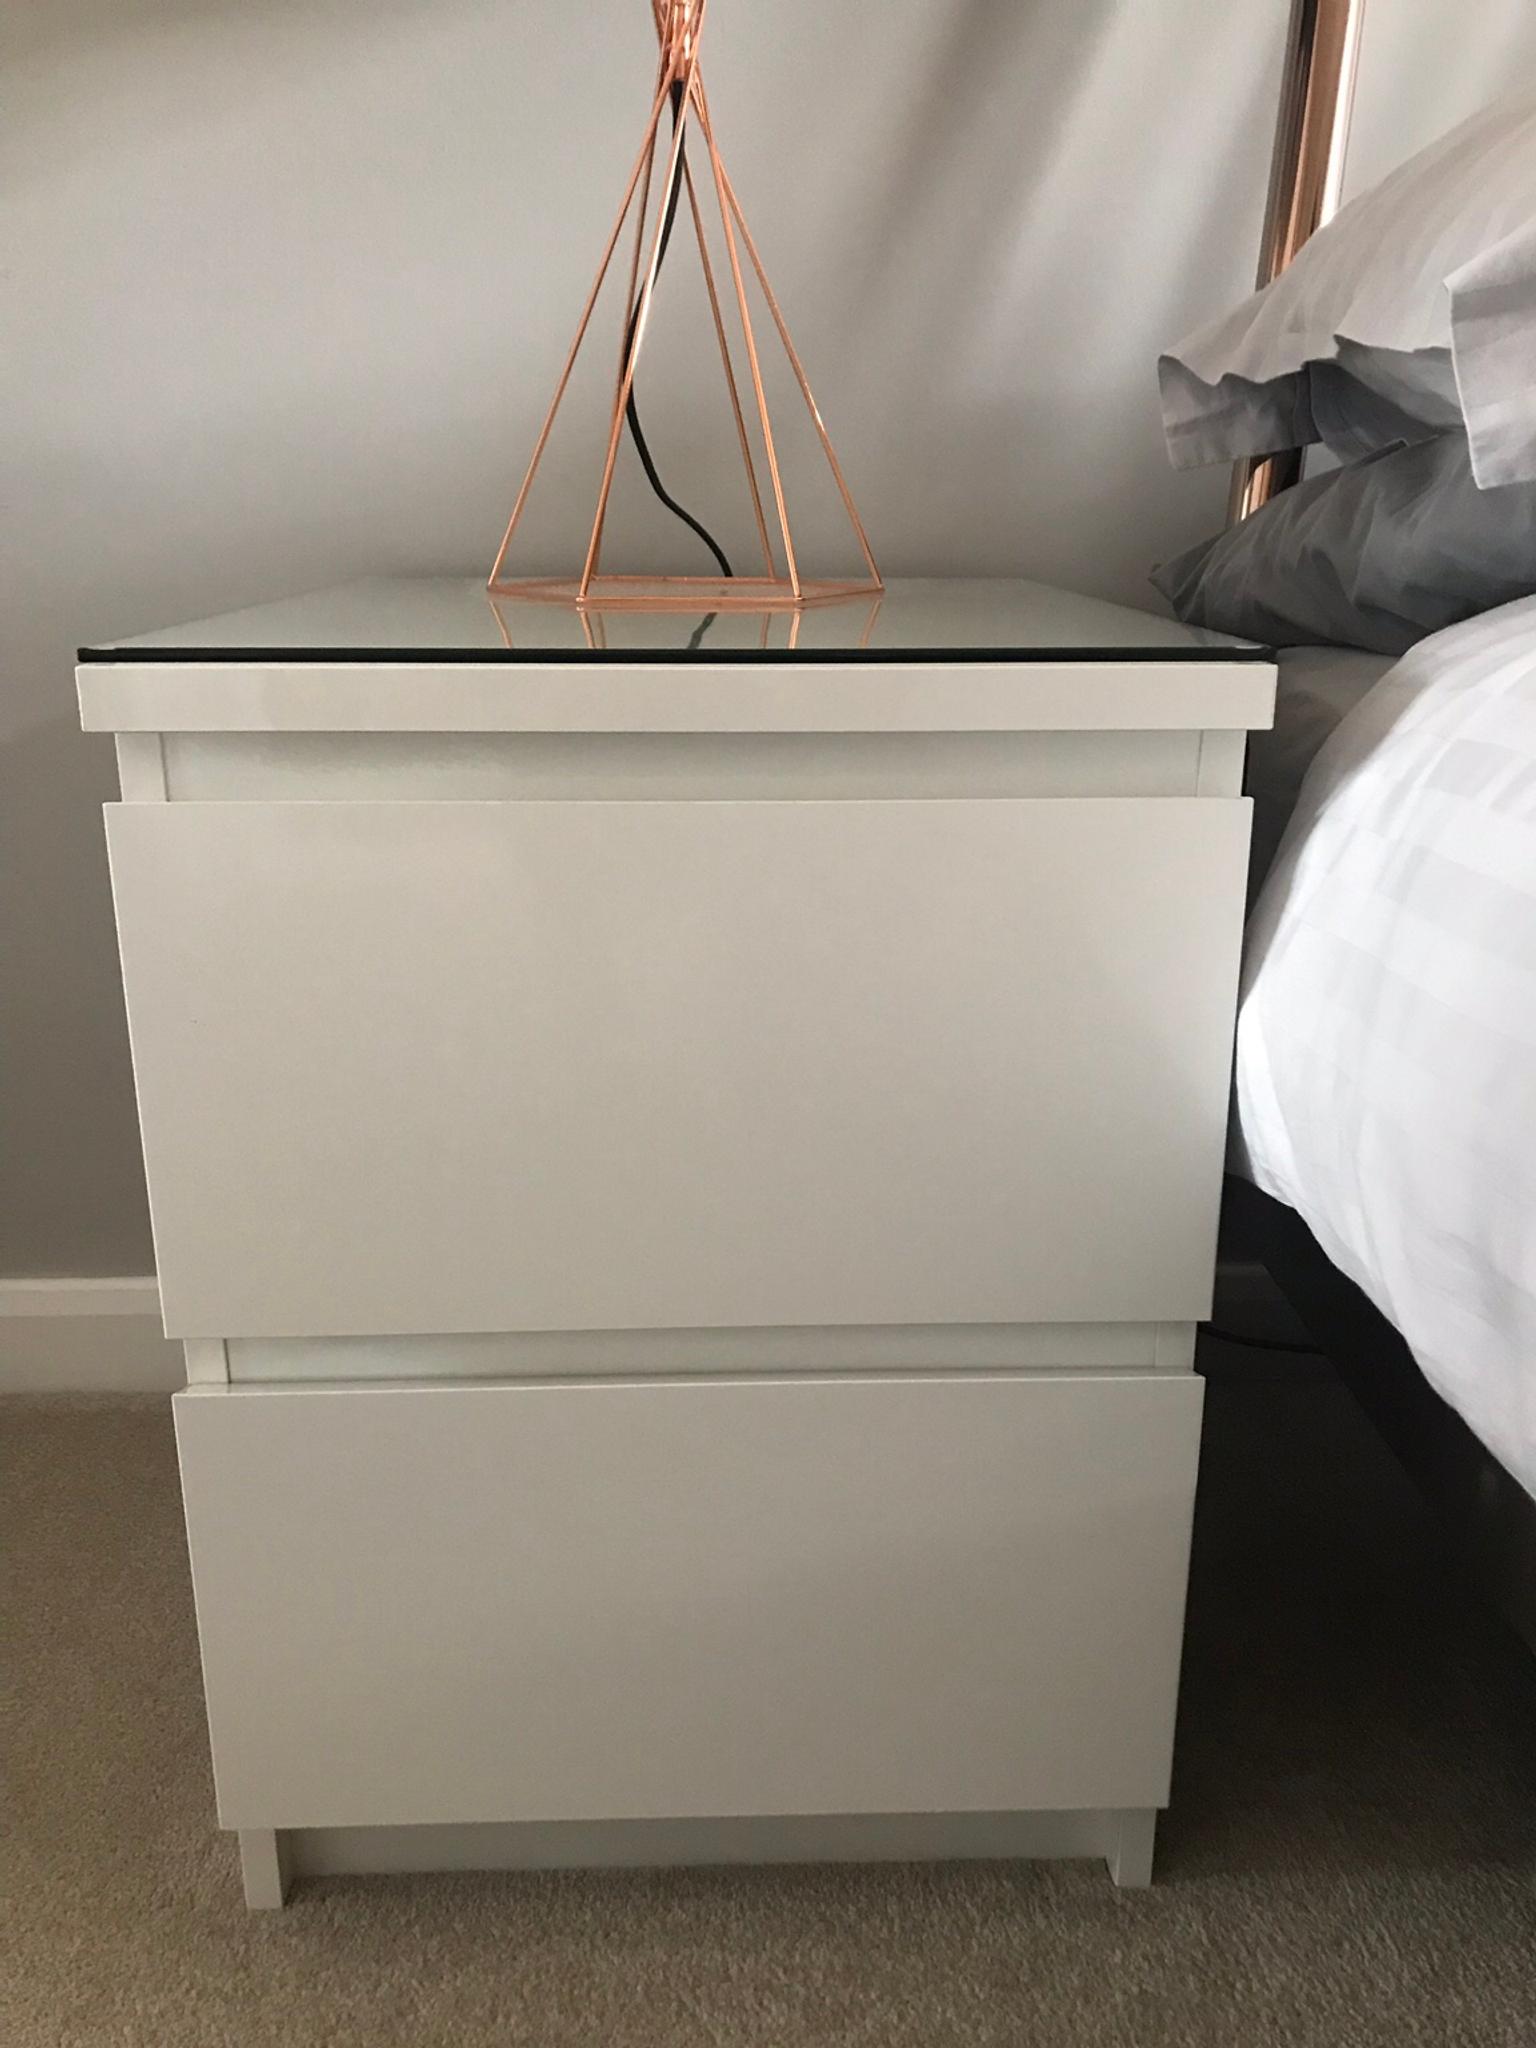 Ikea Malm White High Gloss Bedroom Furniture In Cv11 Hinckley And